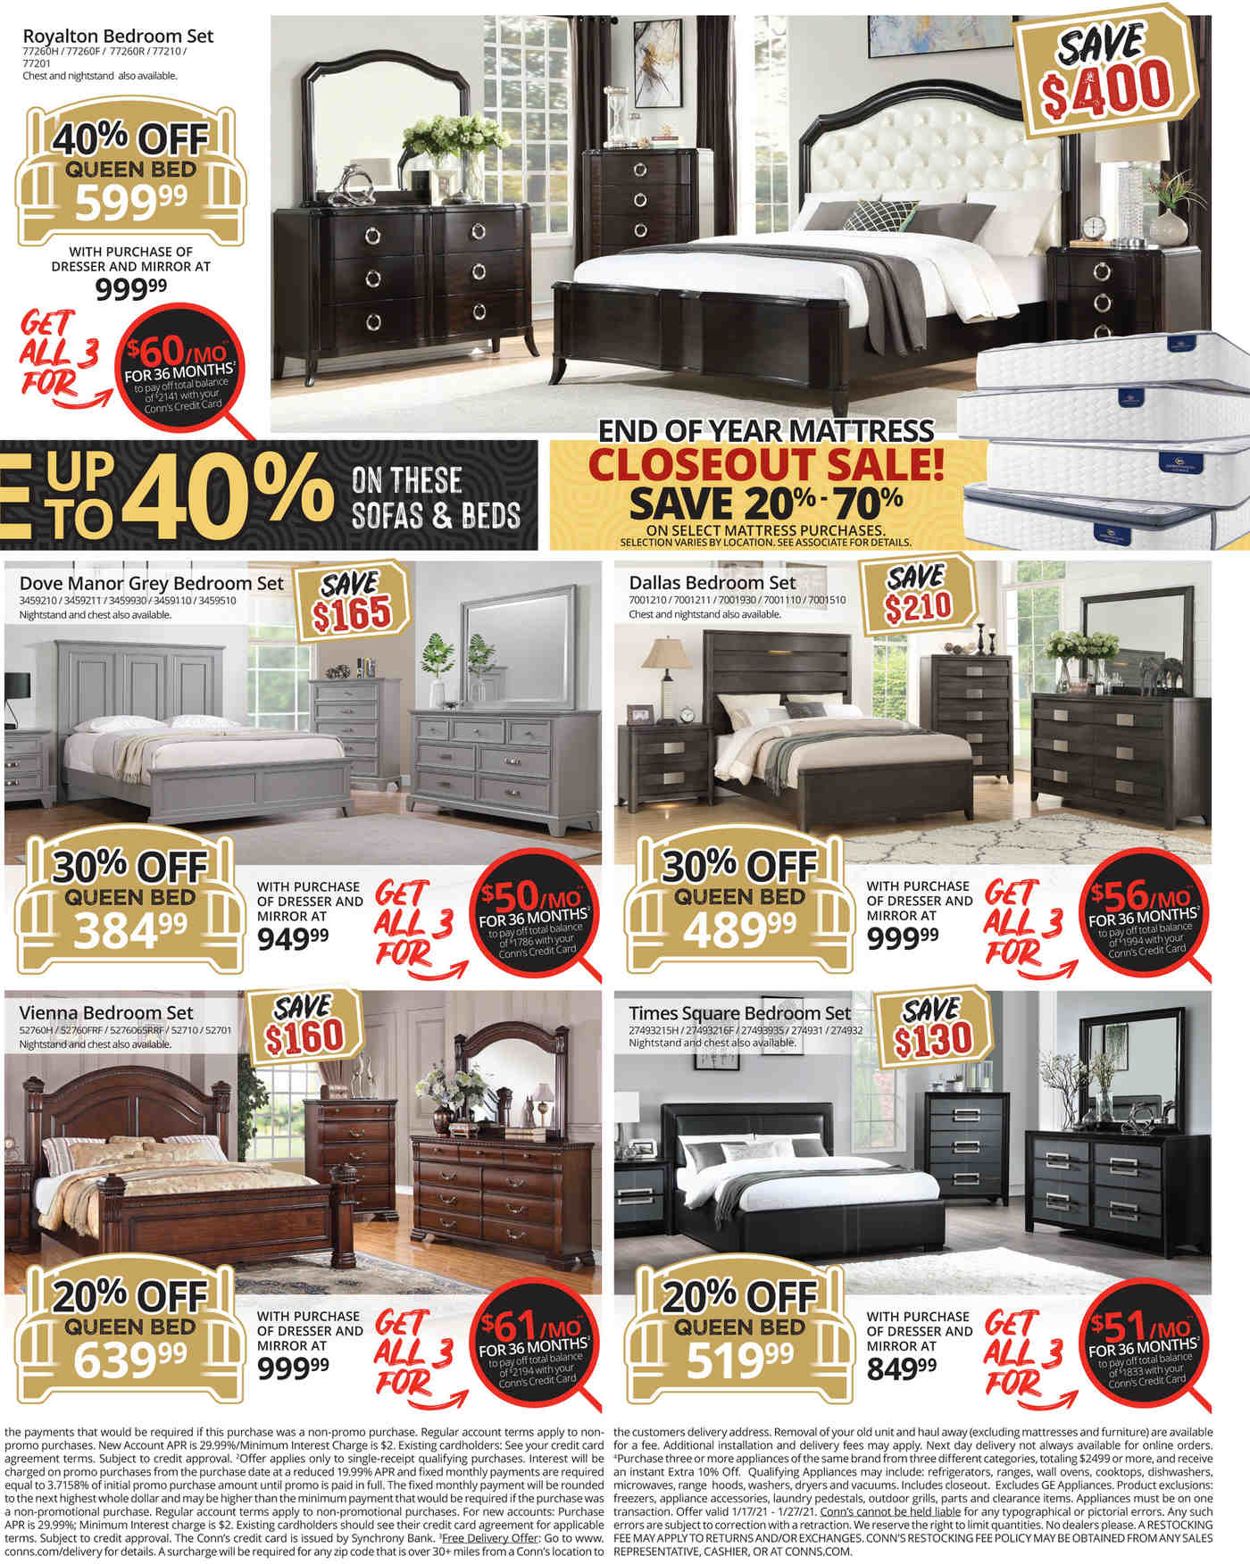 Catalogue Conn's Home Plus Low Prices on Furniture and More 2021 from 01/17/2021